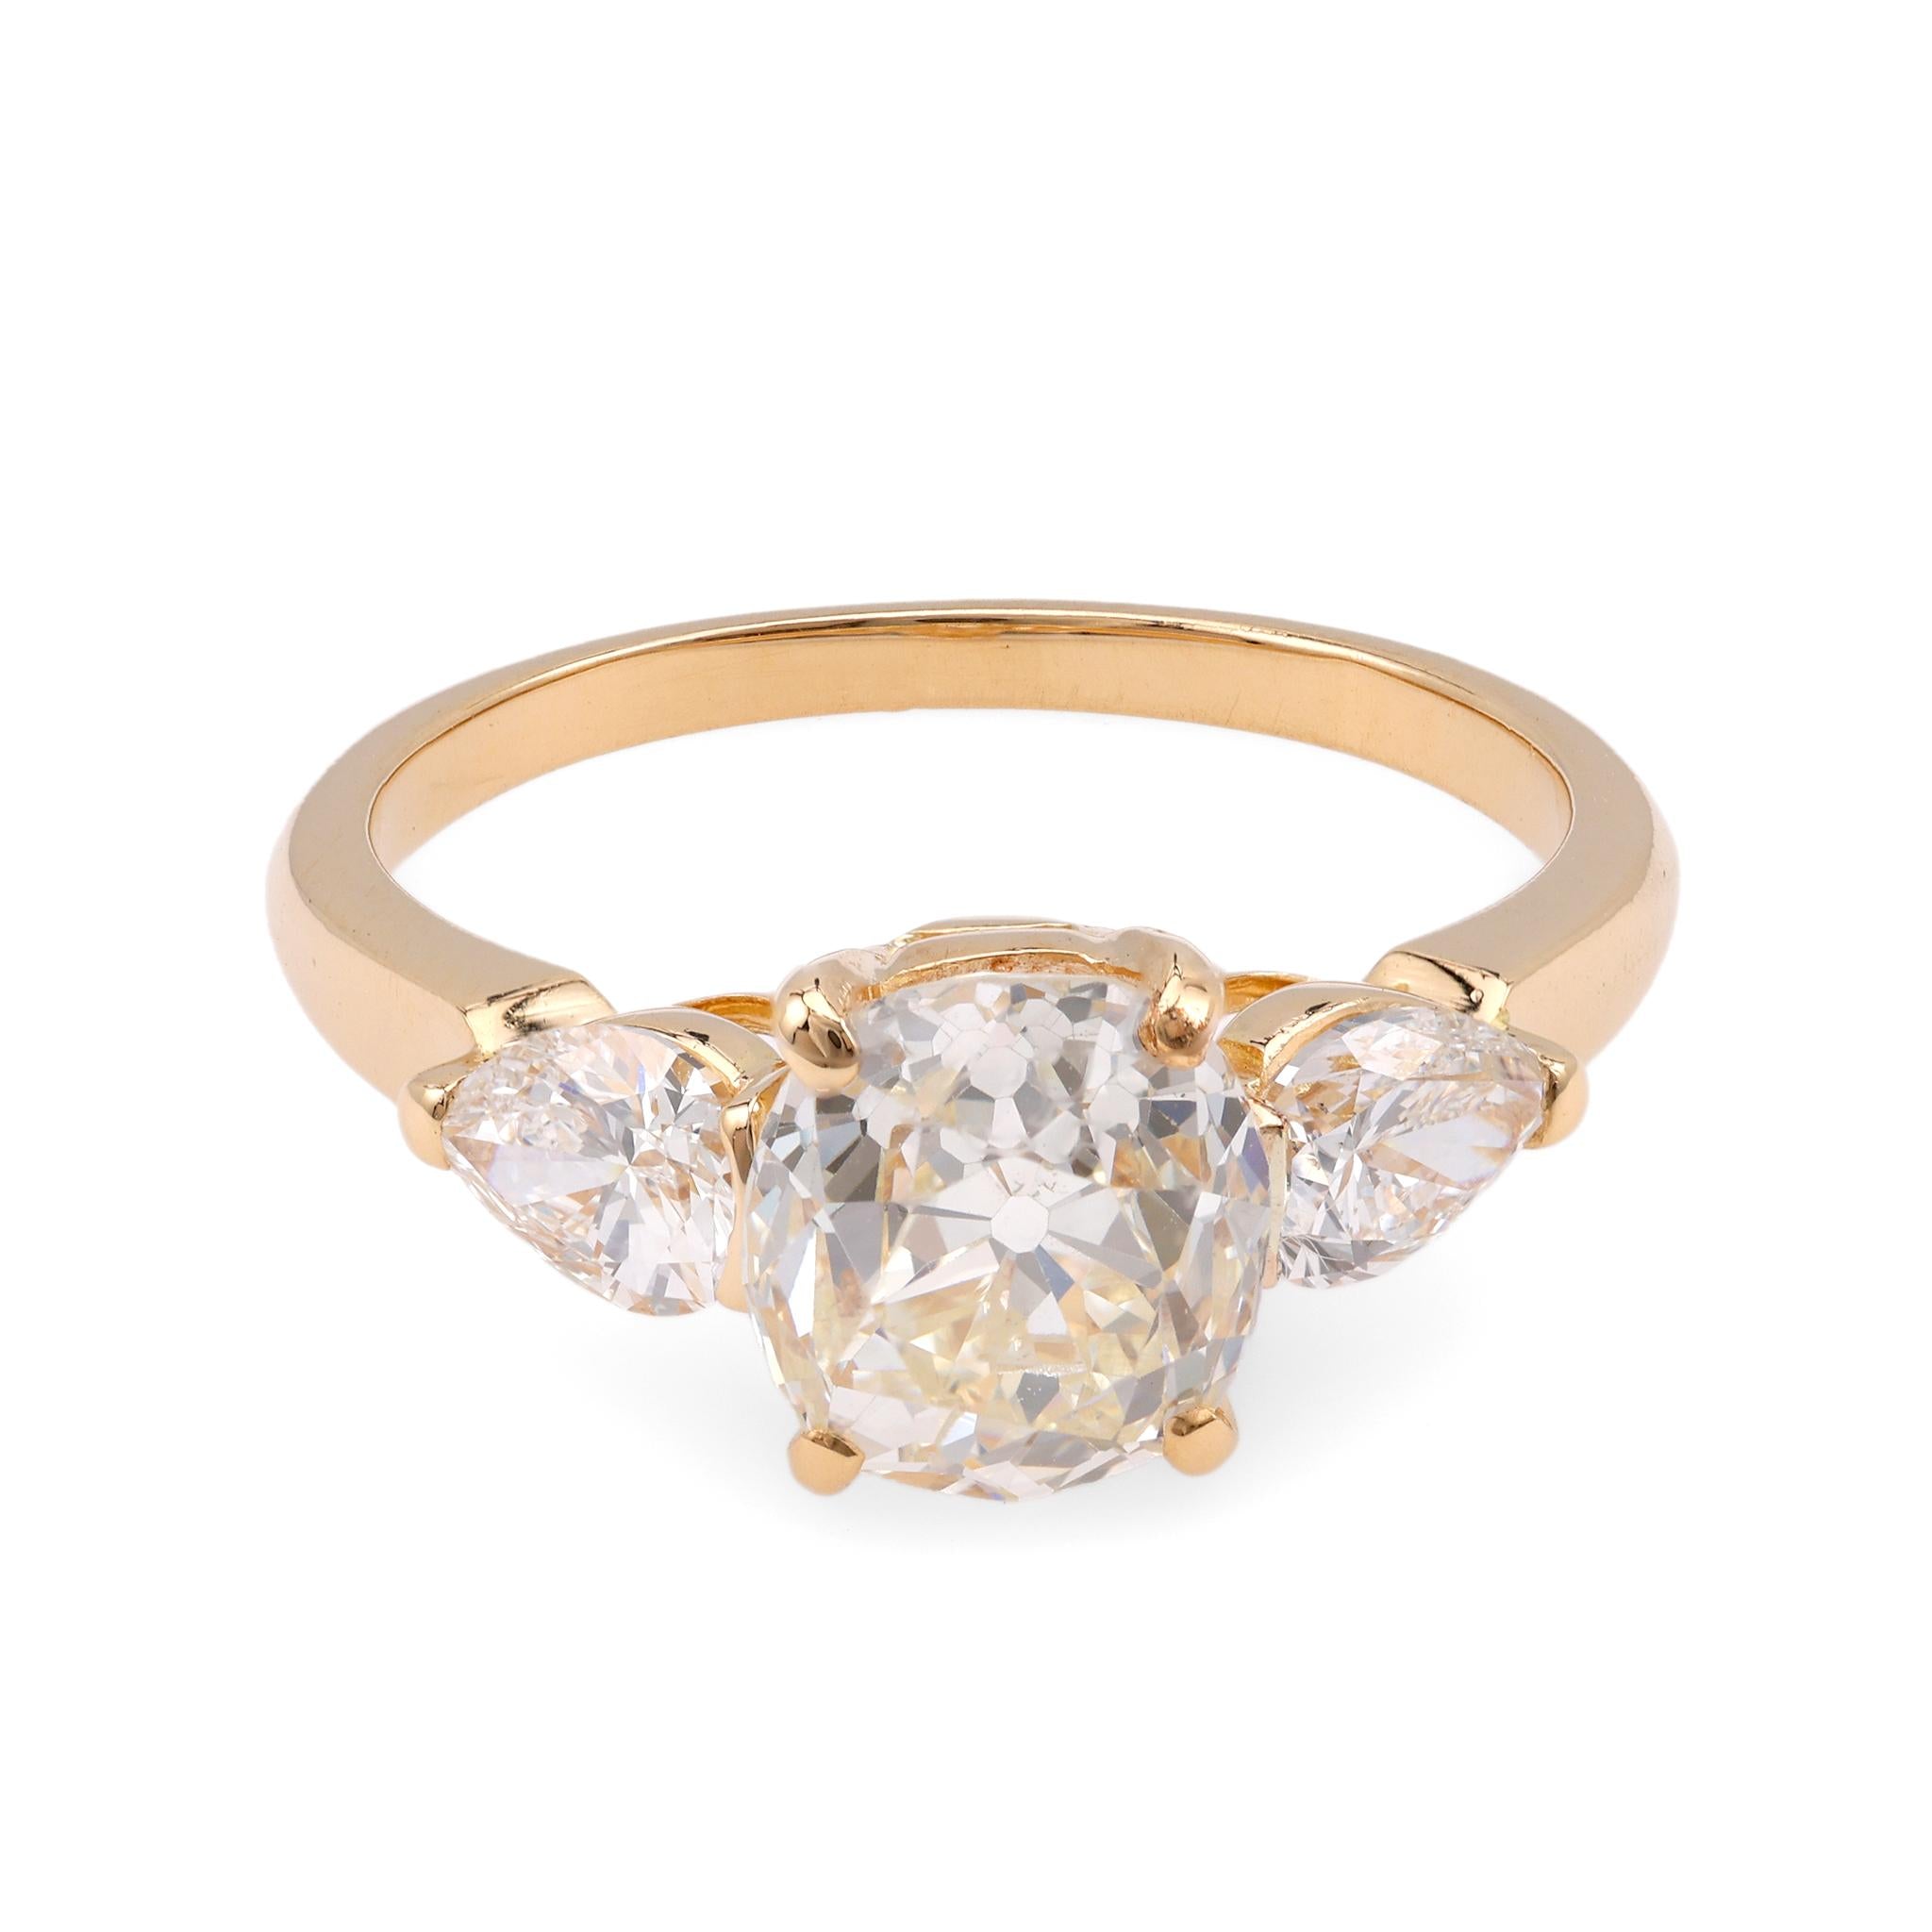 French GIA 1.89 Carat Old Mine Cut Diamond Yellow Gold Engagement Ring  Jack Weir & Sons   